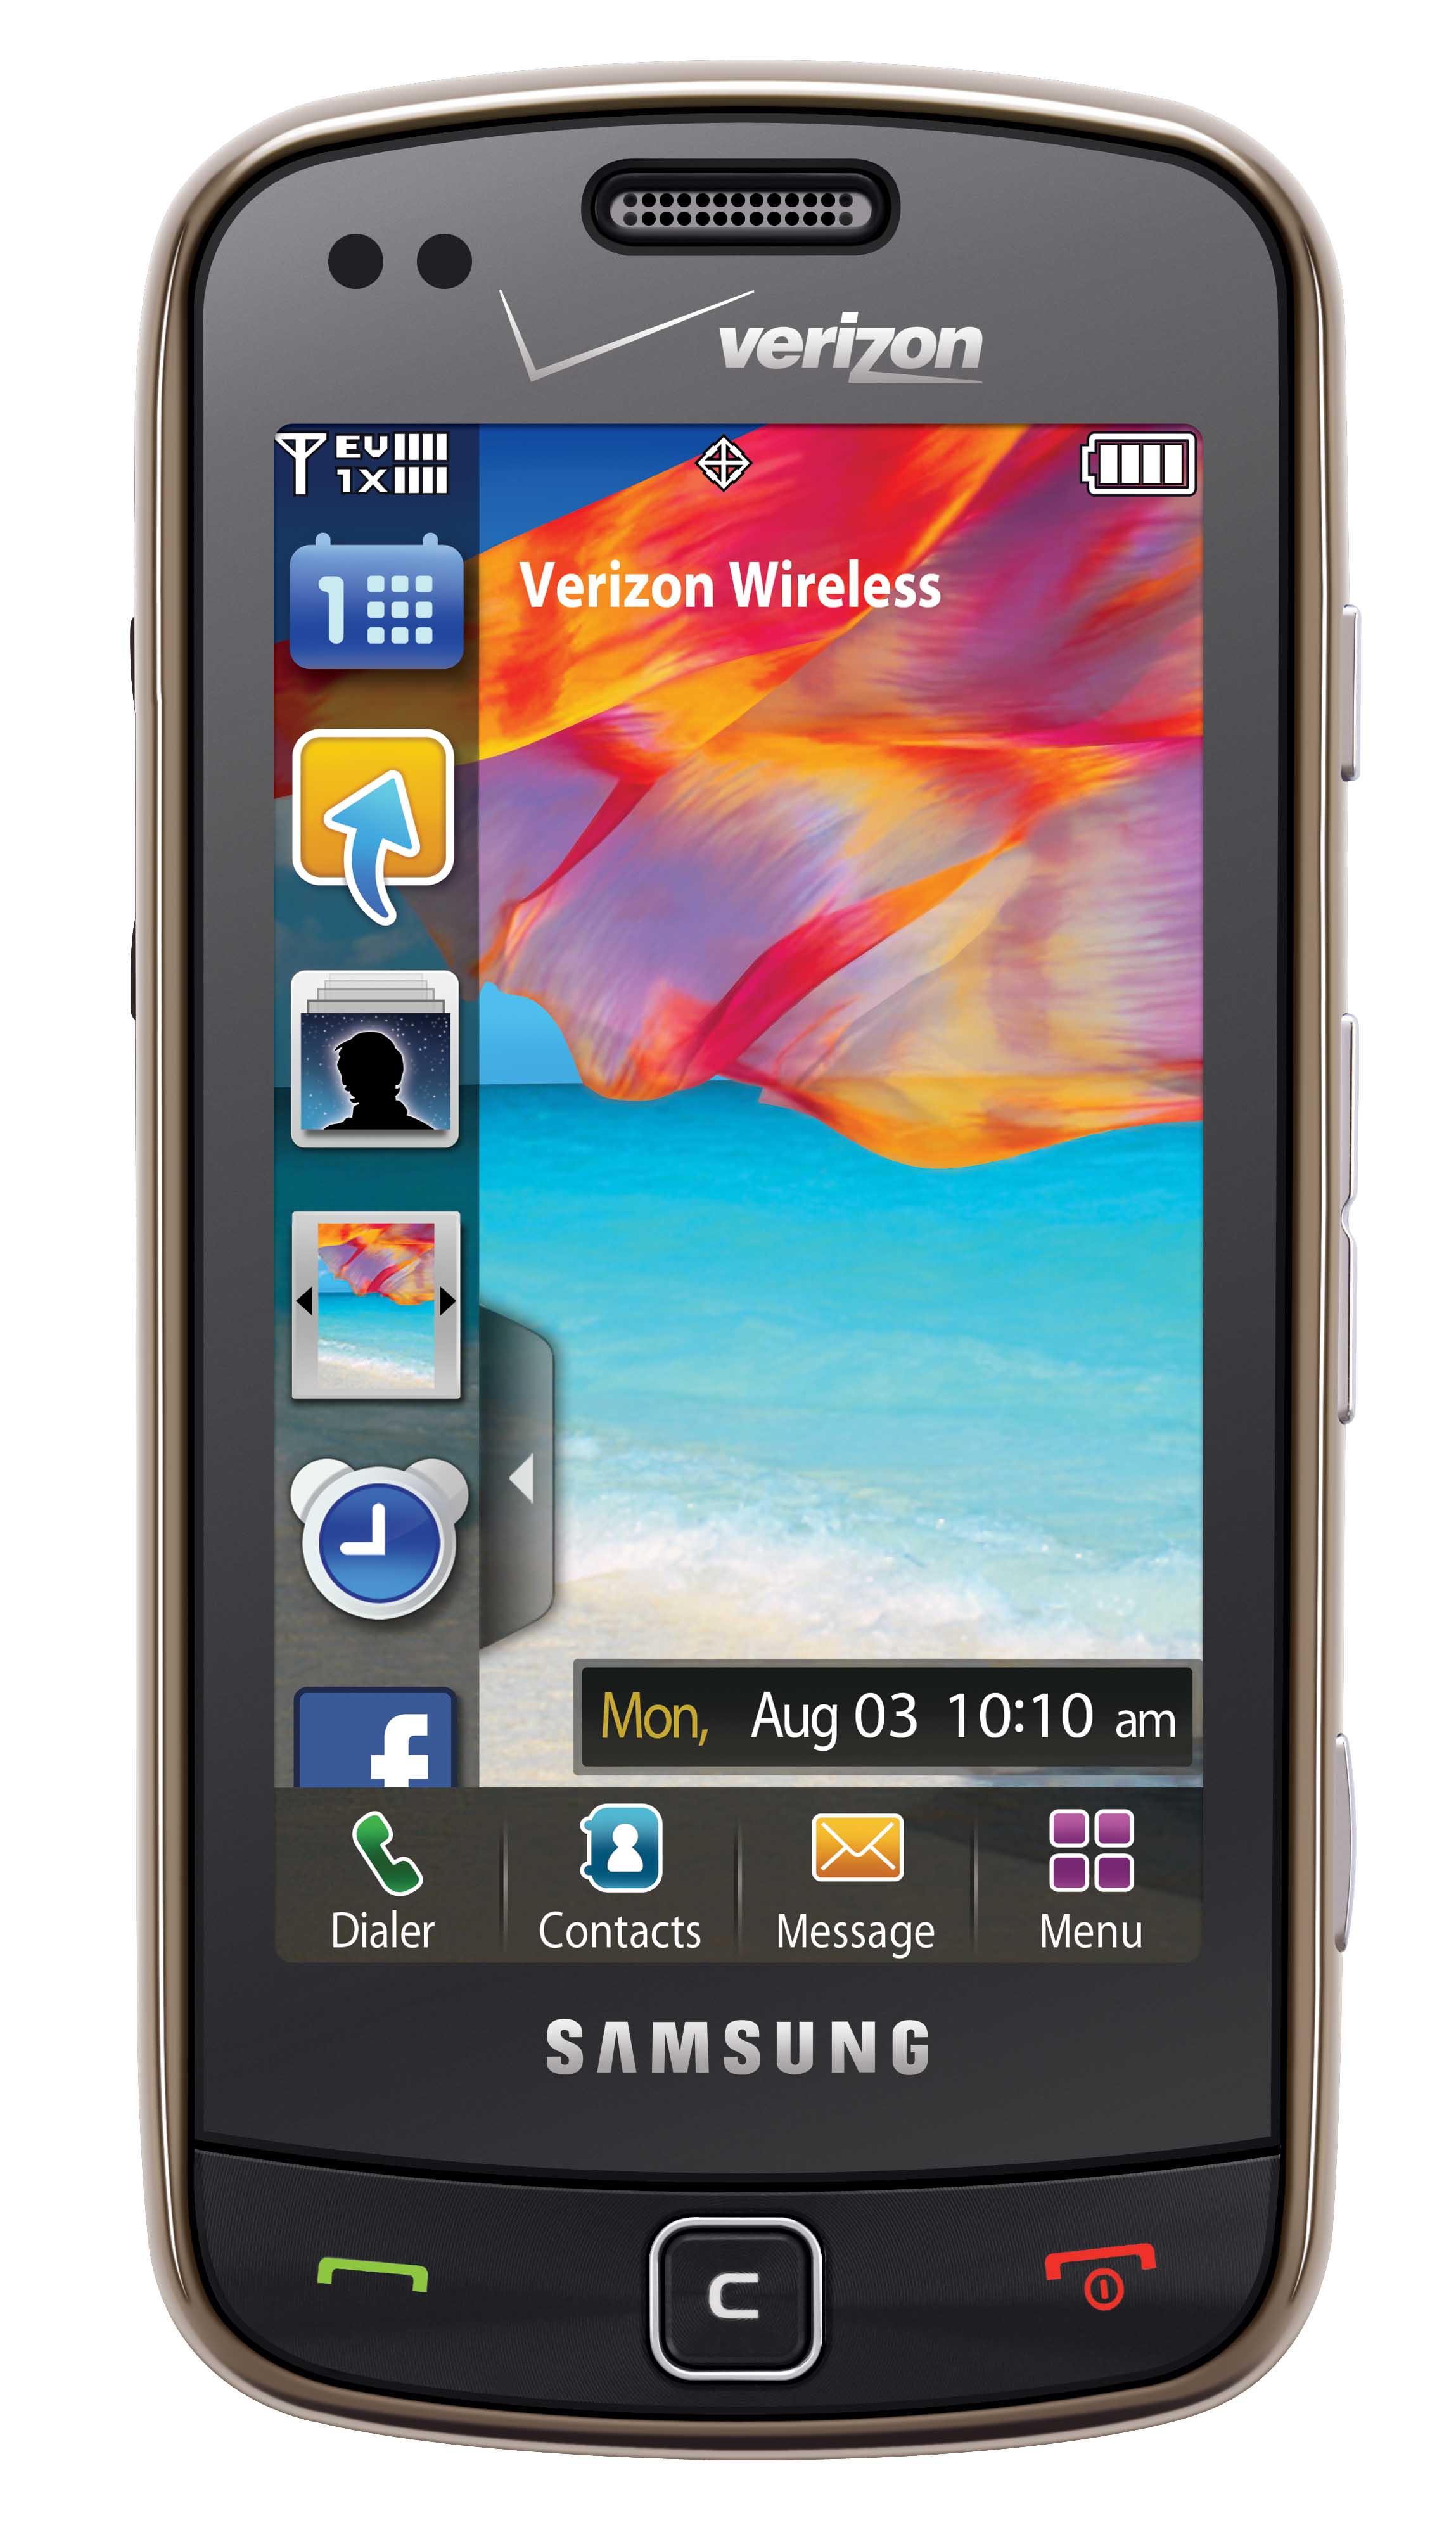 samsung-s-newest-amoled-messaging-phone-comes-to-verizon-pcworld